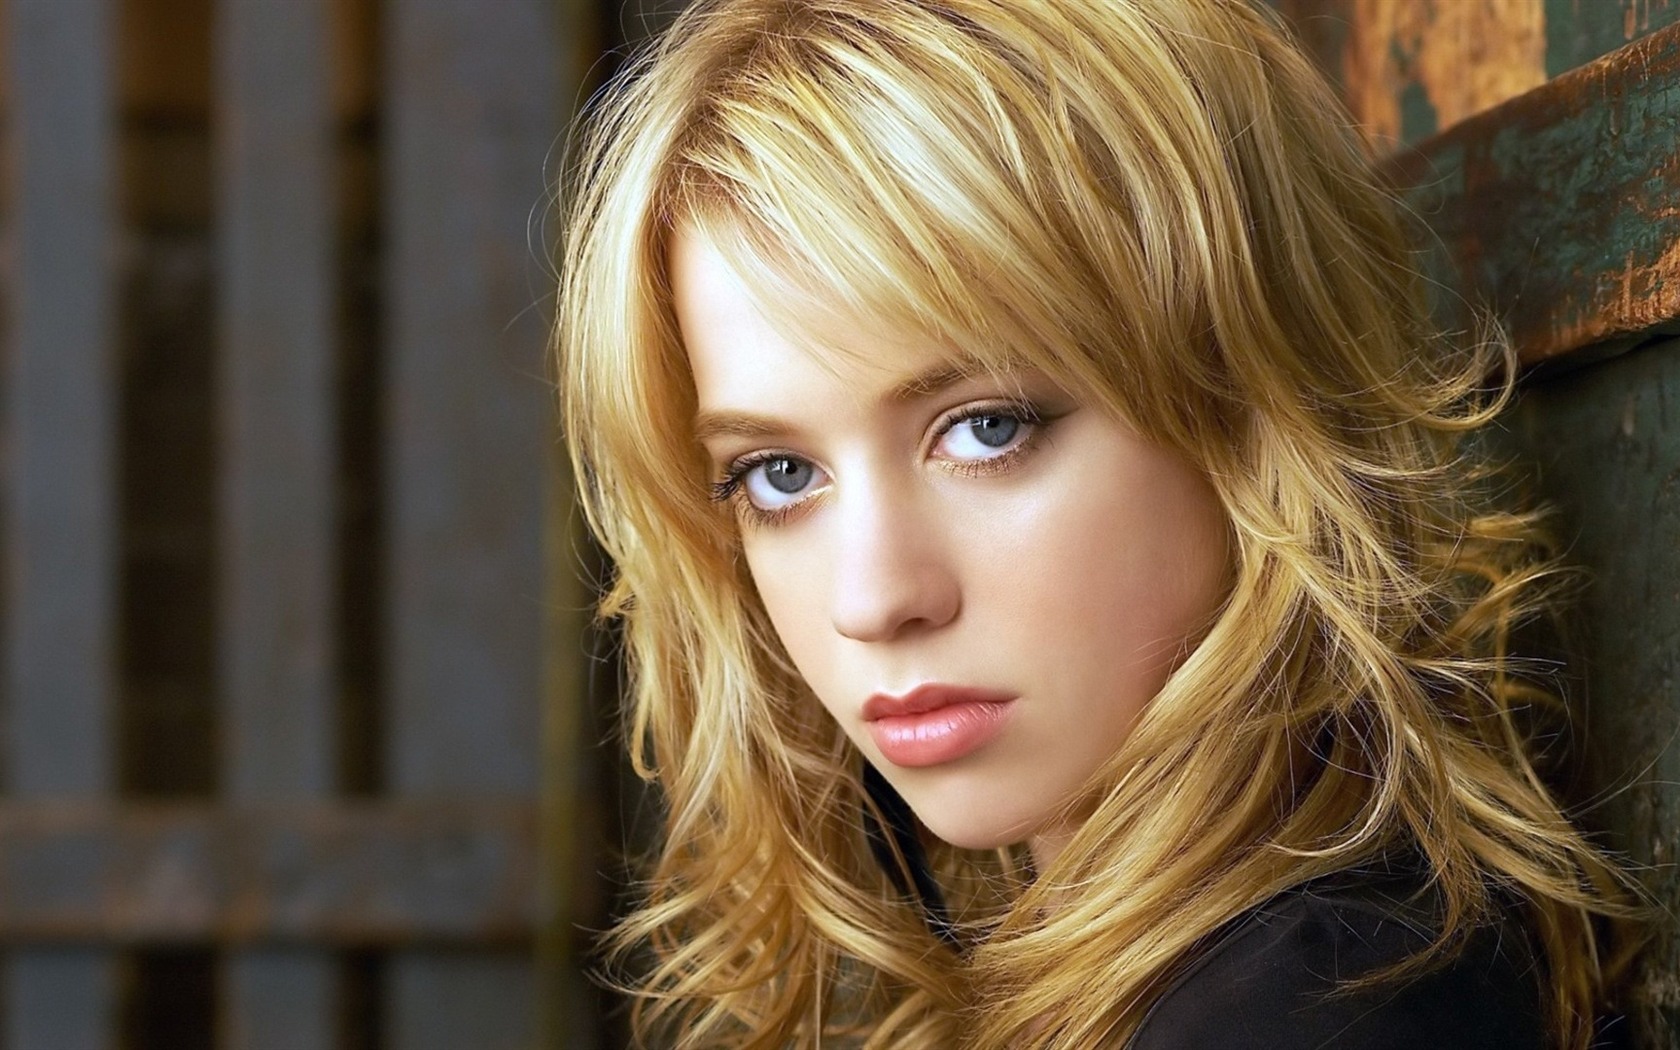 Simple Indian Girls Wallpapers Free Download - Alexz Johnson , HD Wallpaper & Backgrounds